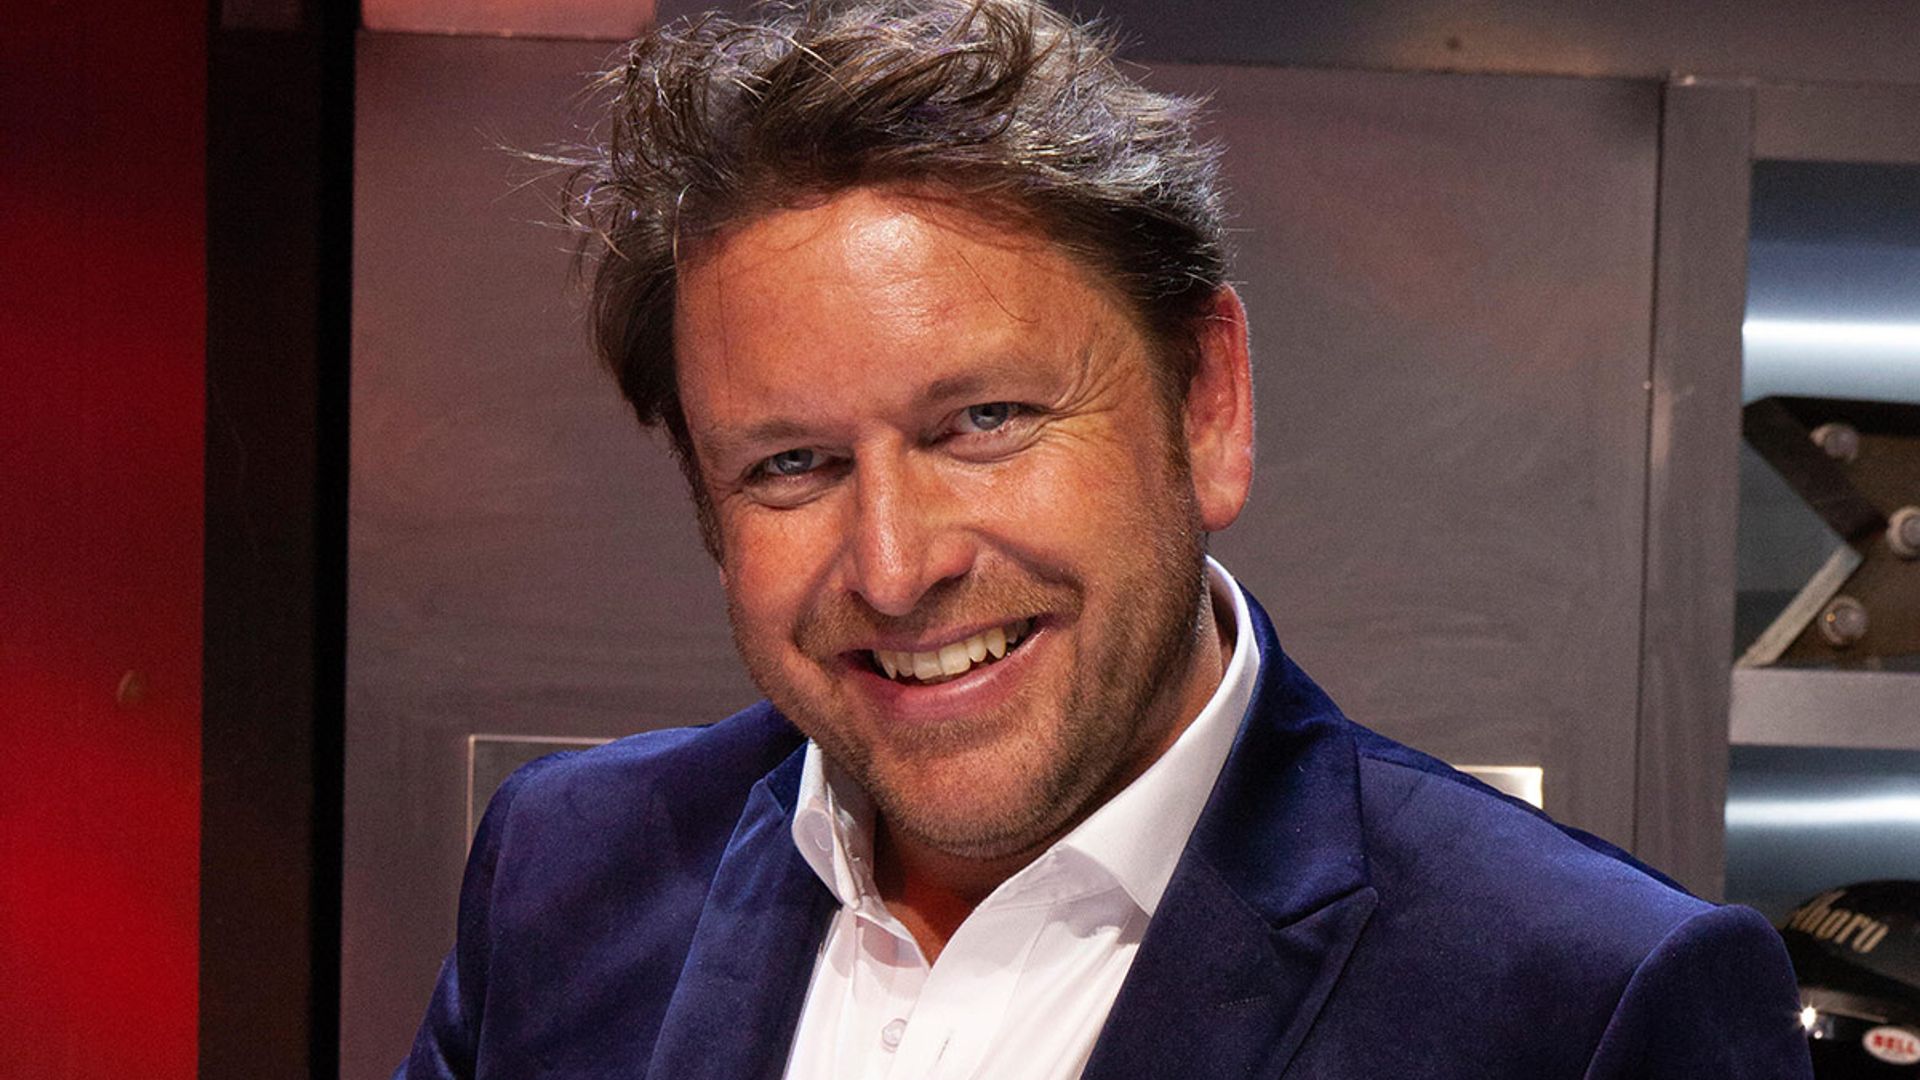 Celebrity chef James Martin shares exciting news with fans